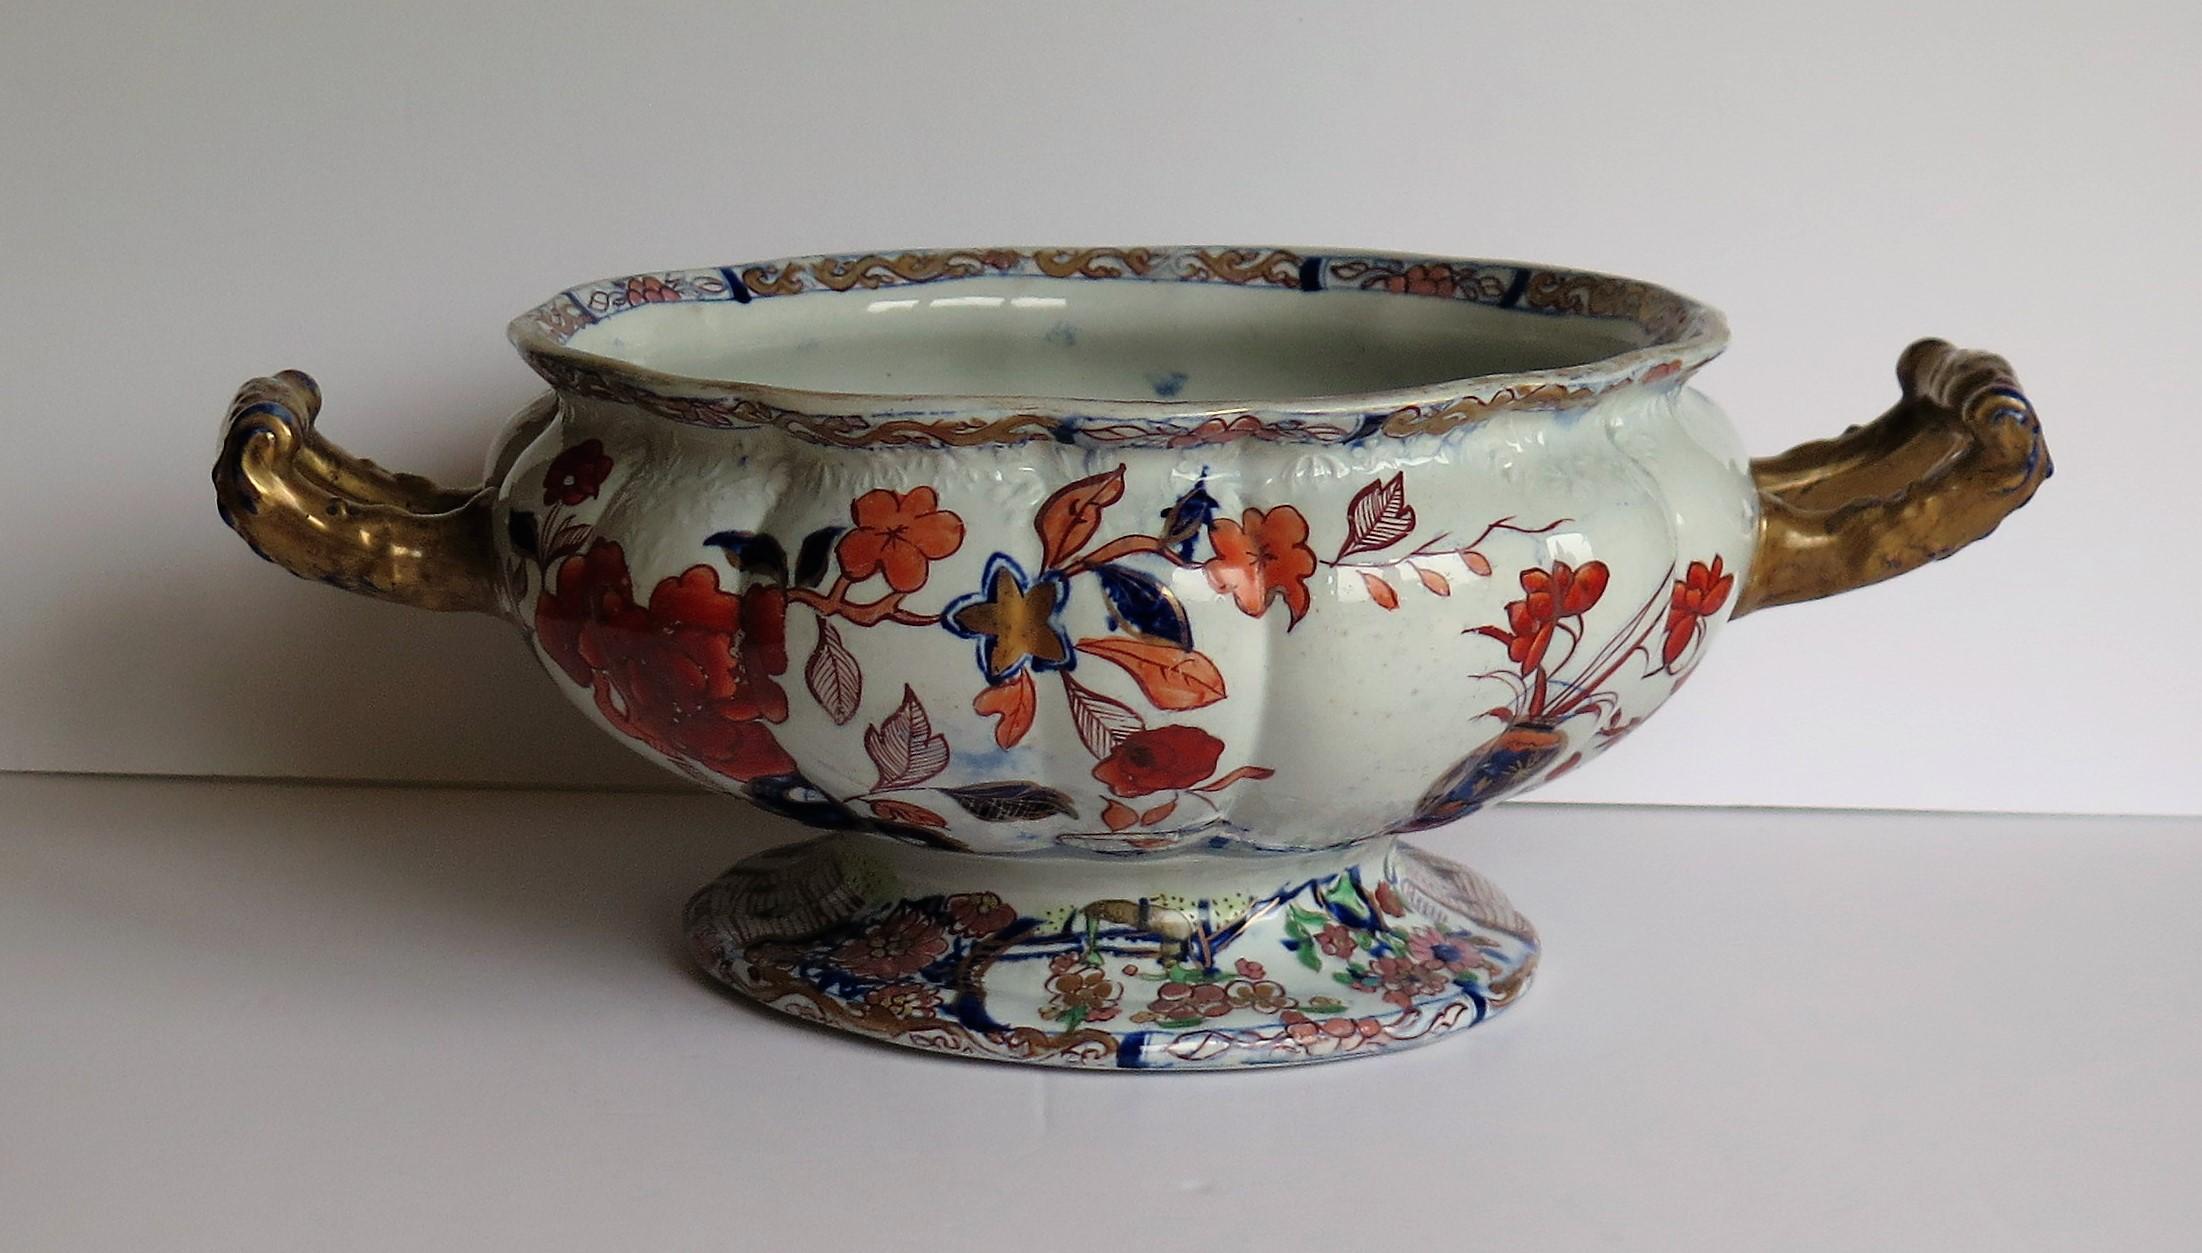 This is a rare, beautiful and very large Handled Bowl made by Mason's Ironstone in the Peking Vase pattern, in the early 19th century, circa 1820.

Very large Mason's bowls in this shape are very rare. 

The bowl is circular with an everted wavy rim